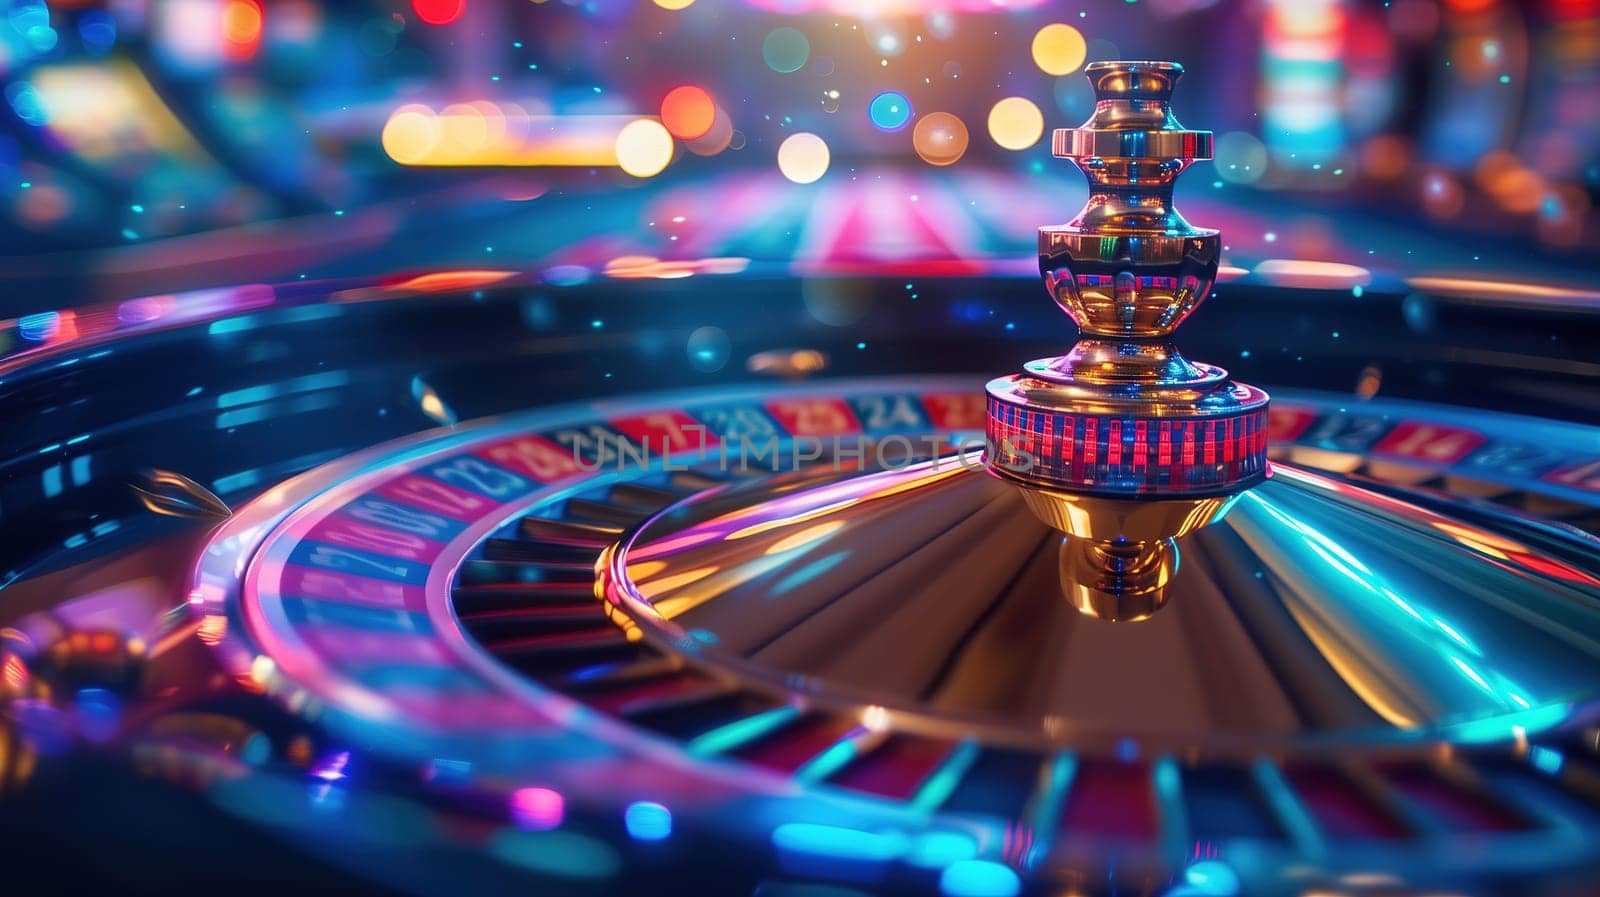 The image shows a close-up view of a casino roulette wheel with numbers and colors on it. The spinning ball is about to determine the winning number.